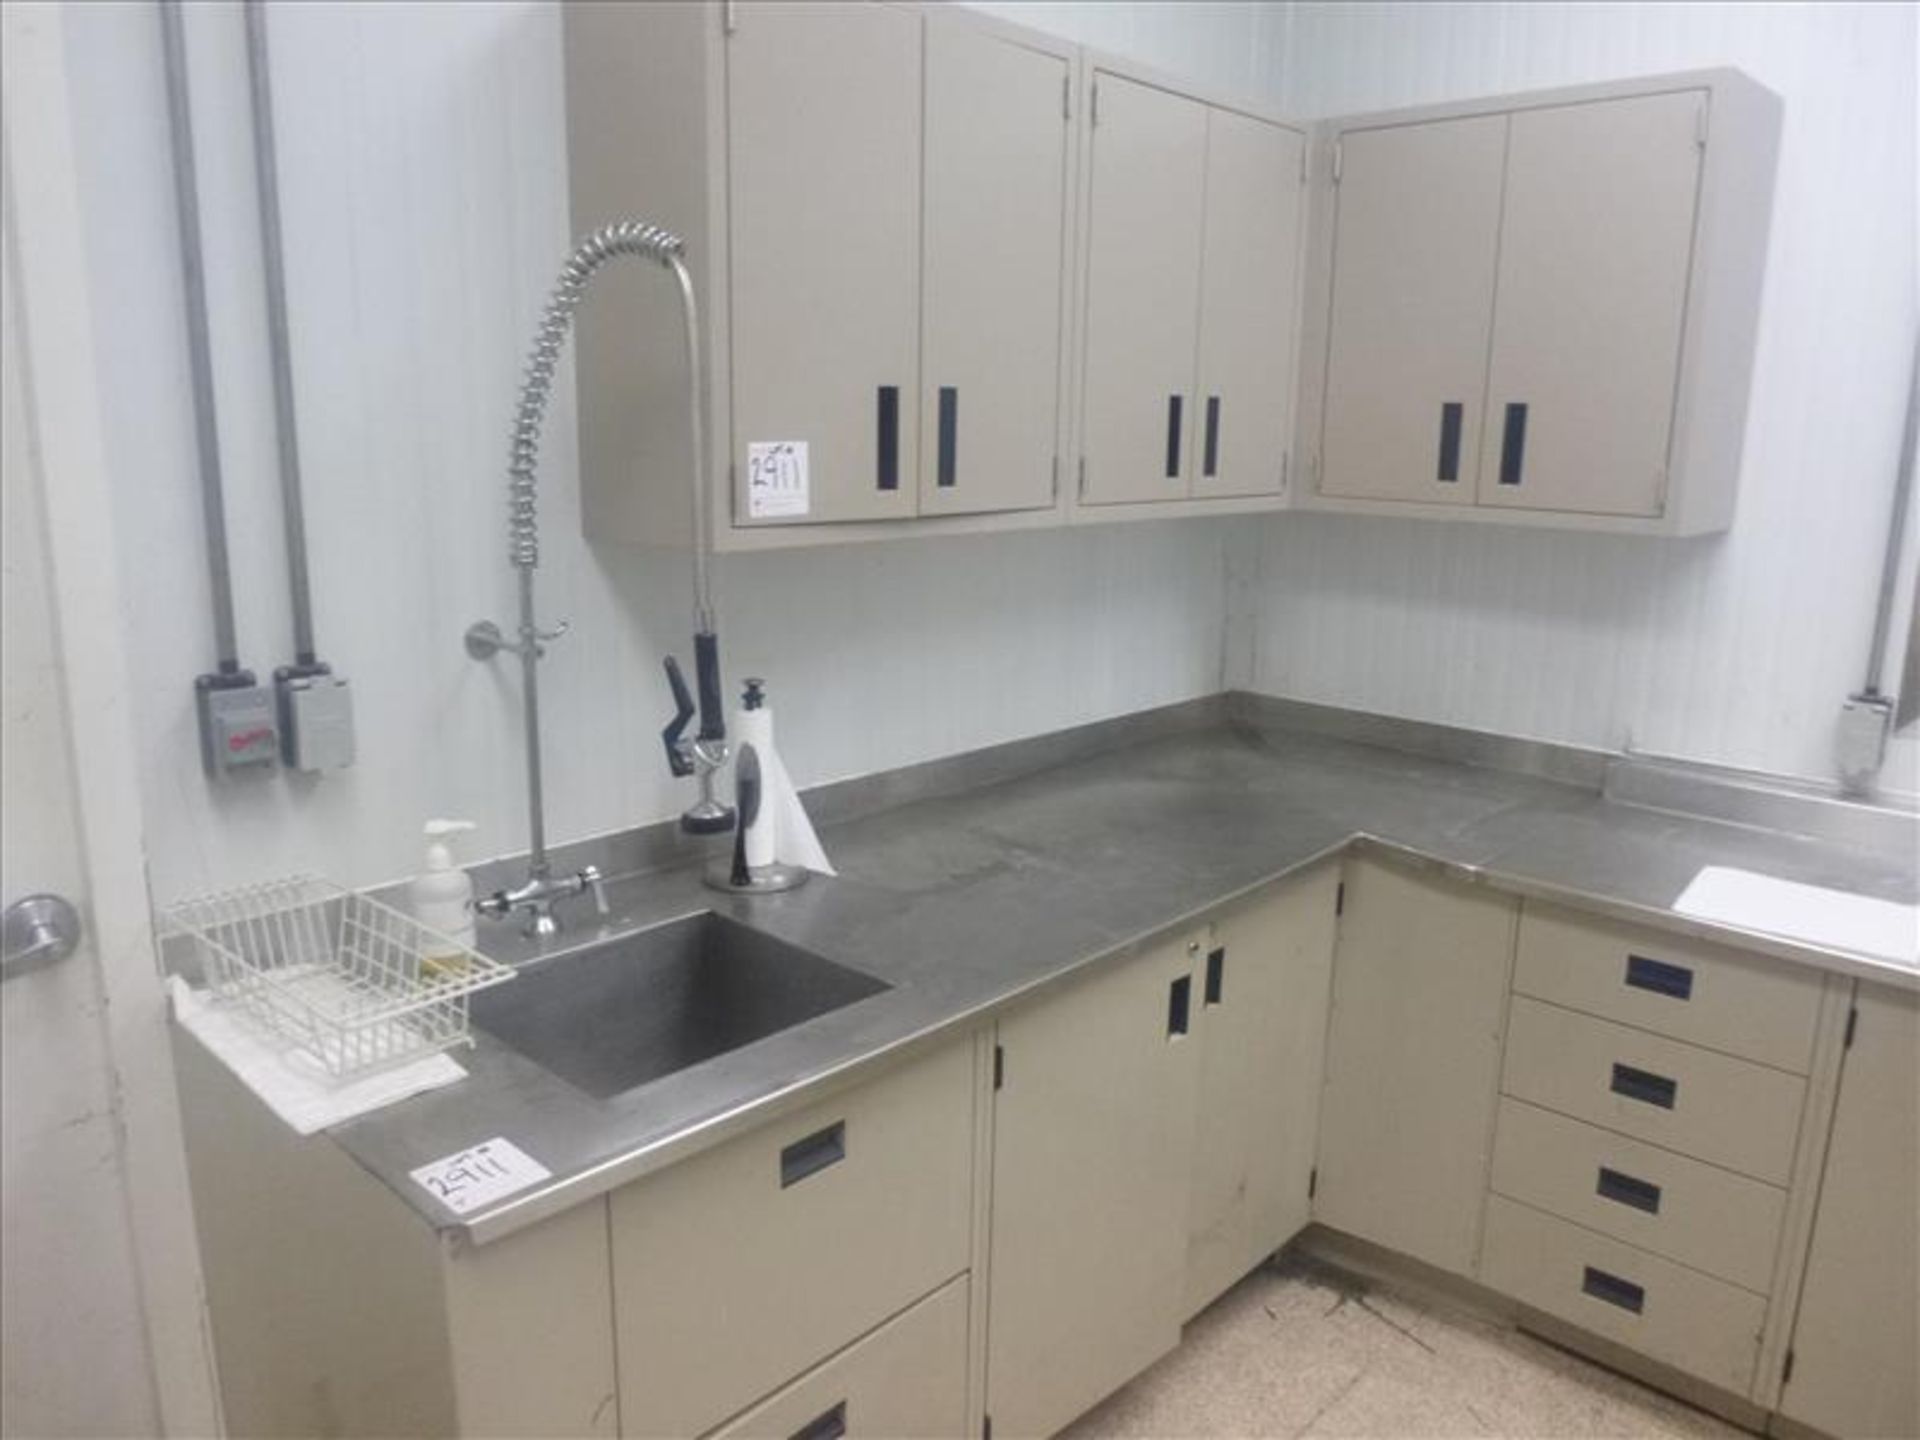 lab cabinets w/ s/s top and sink, 30 in. x 141 in. x 60 in. c/w upper cabinets [1st Floor, ACC] - Image 2 of 3